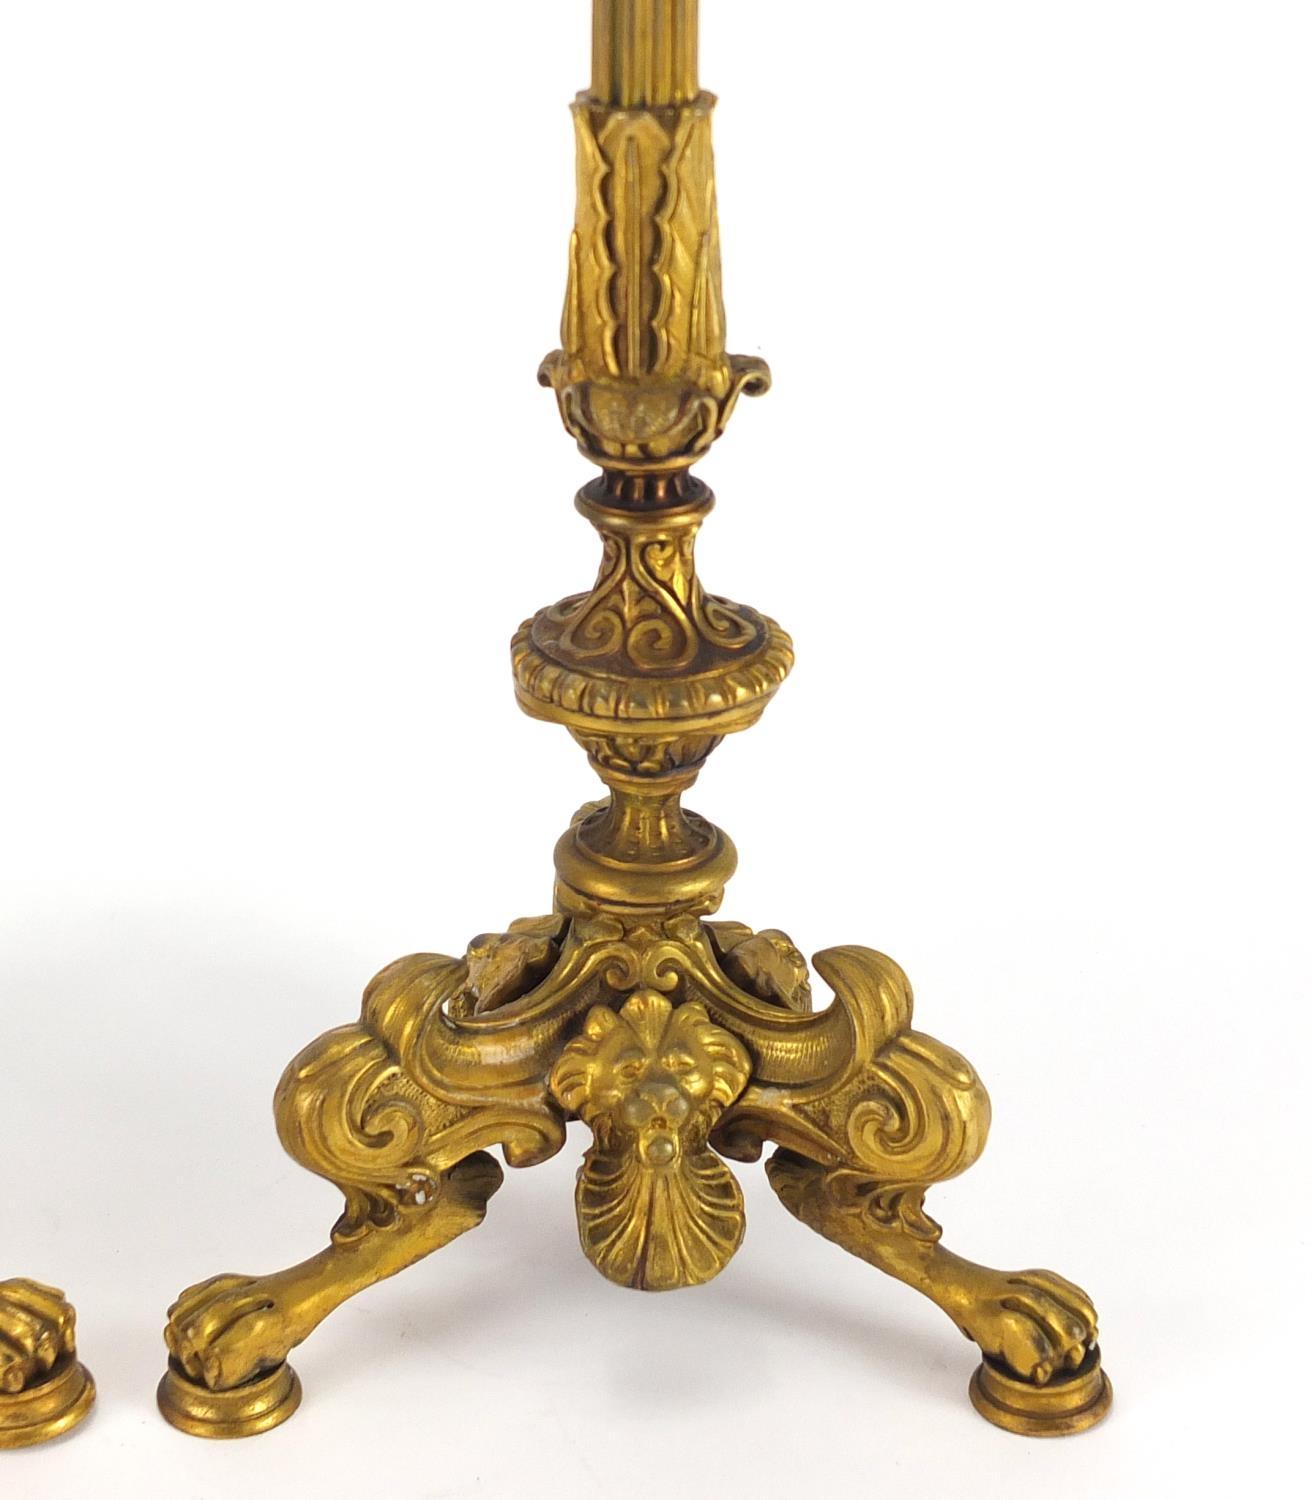 Pair of 19th century ormolu candlesticks with reeded columns, lion masks and claw feet, each 34. - Image 3 of 6